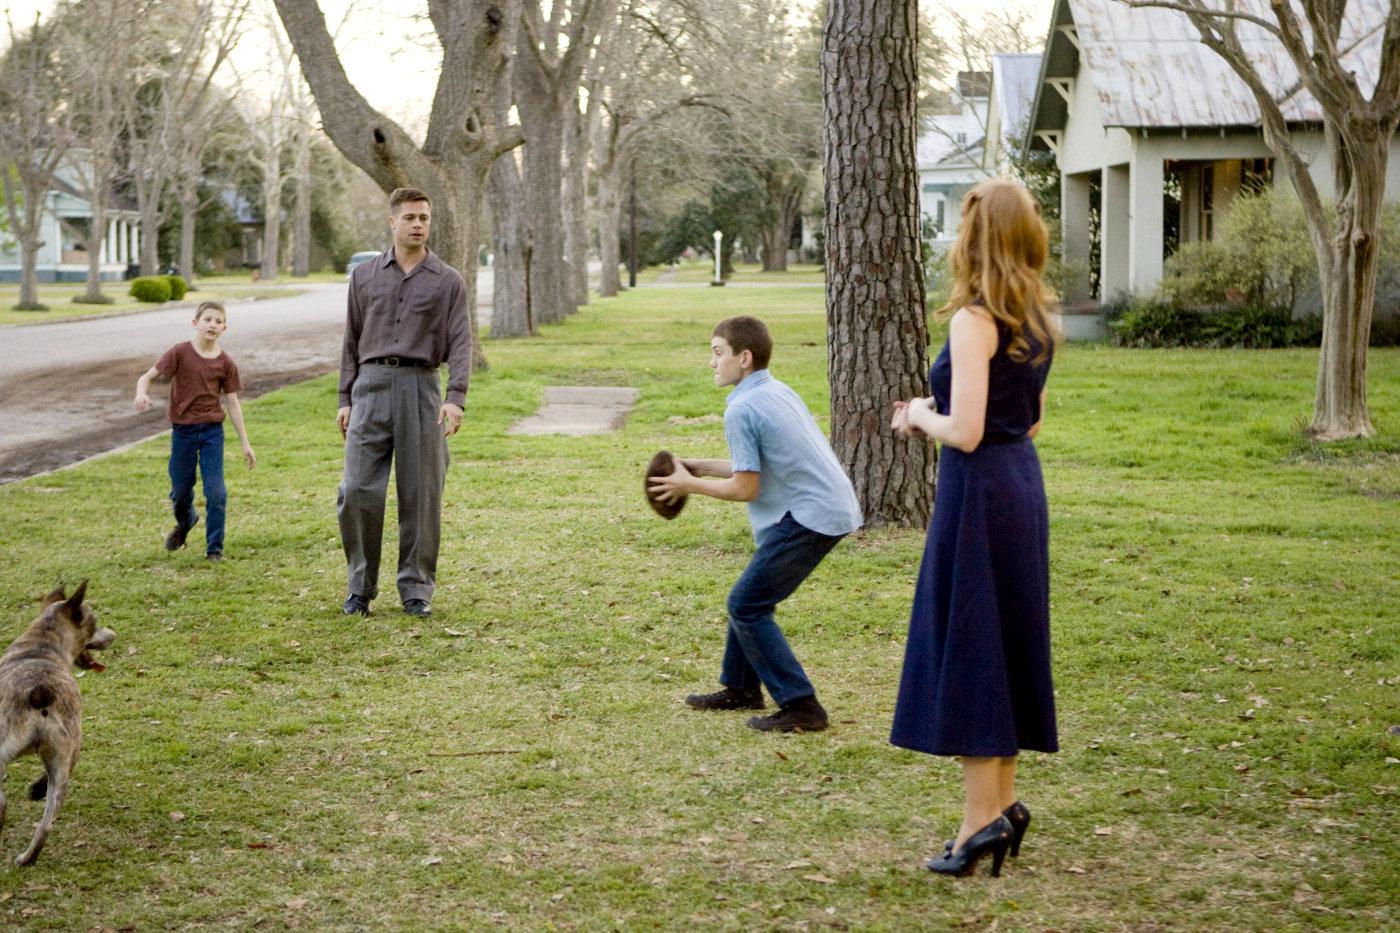 Brayden Whisenhunt, Brad Pitt, Zach Irsik and Jessica Chastain in Fox Searchlight Pictures' The Tree of Life (2011)